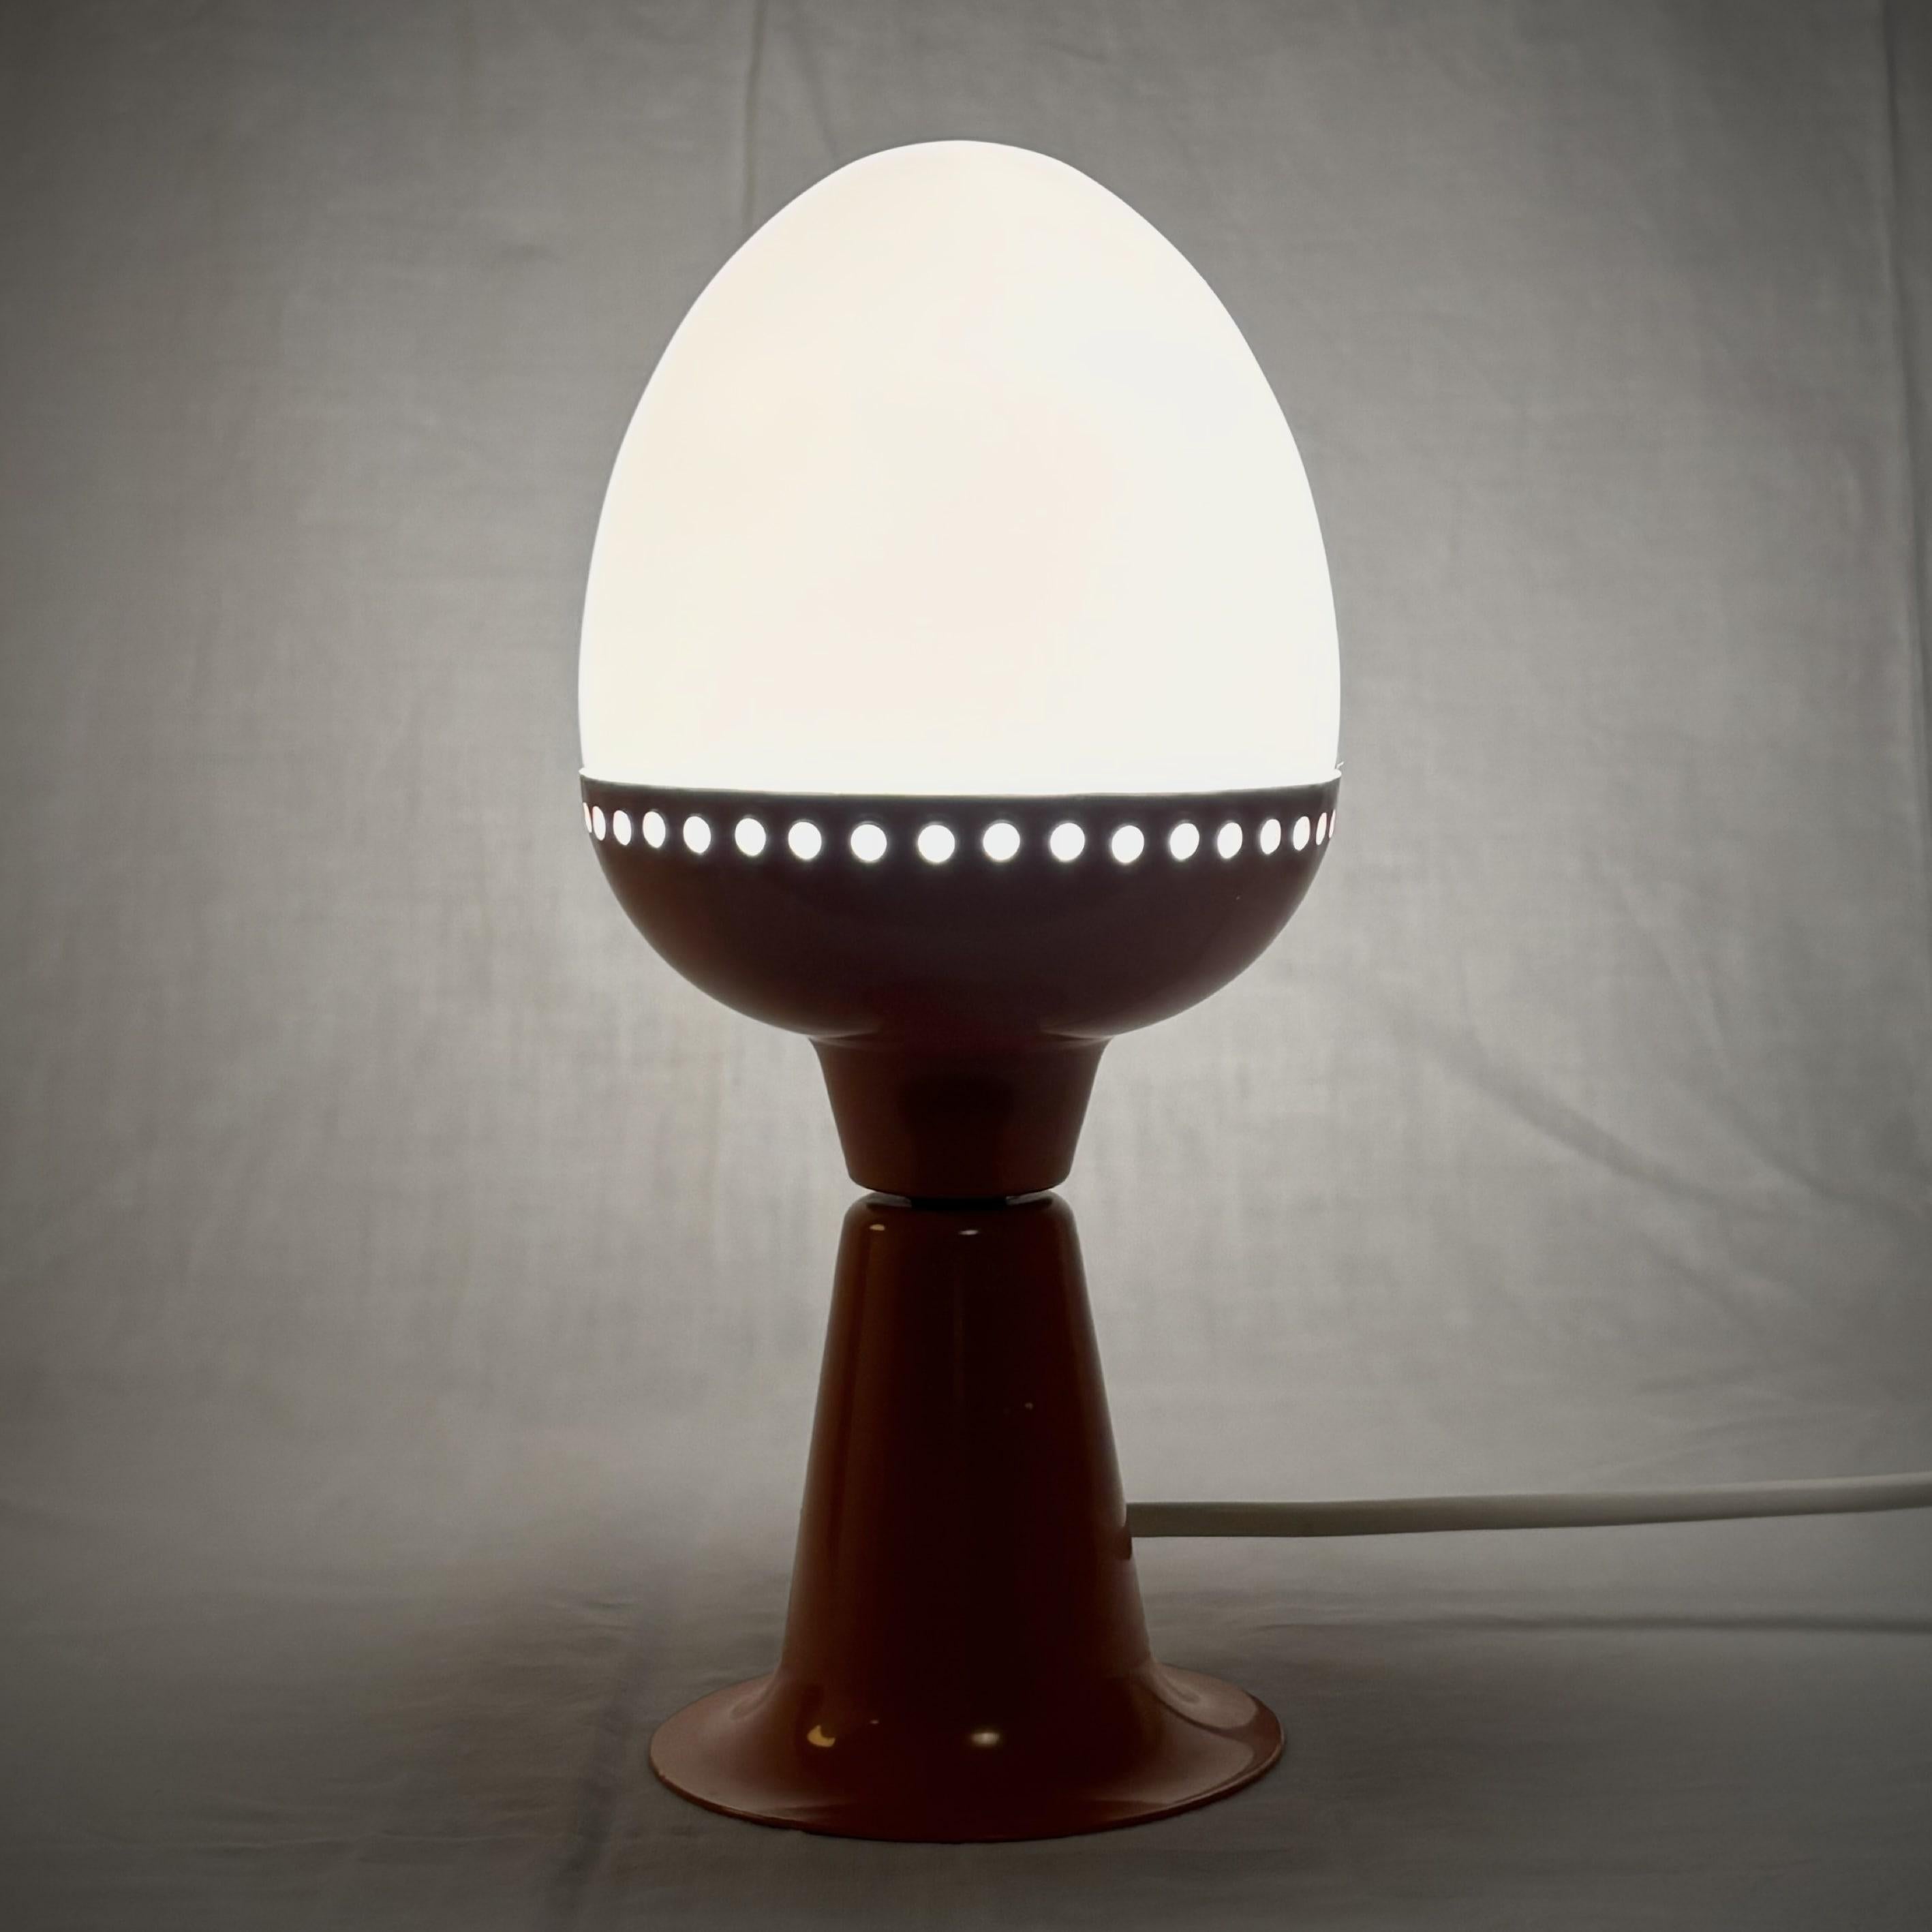 Scandinavian Modern Hans-Agne Jakobsson space age table lamp B225, metal and glass, Sweden, 1960s For Sale